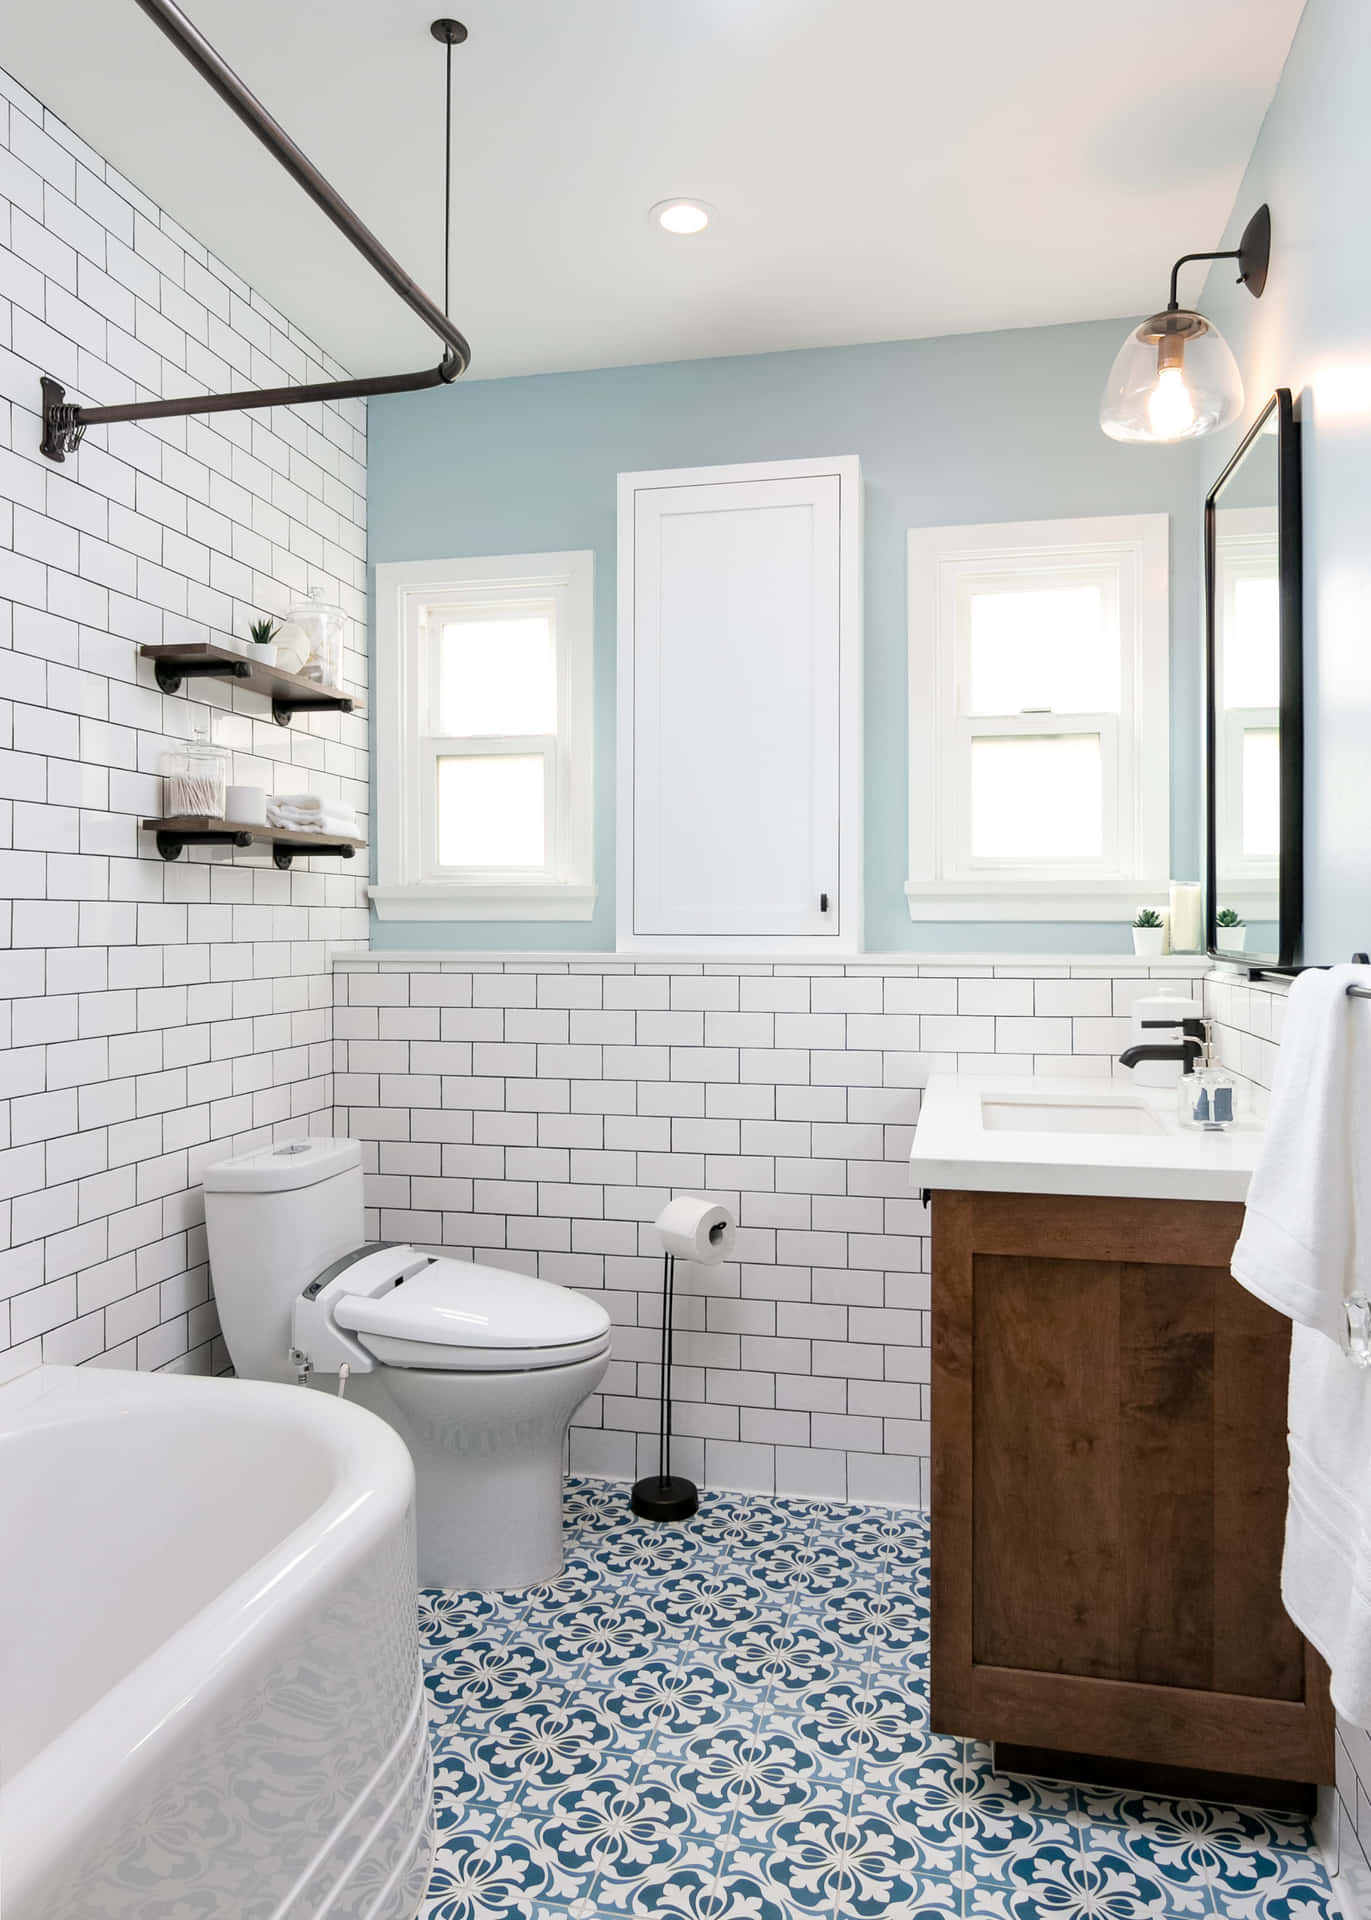 Make a Bold Statement in your Bathroom with a Black and White Color Scheme